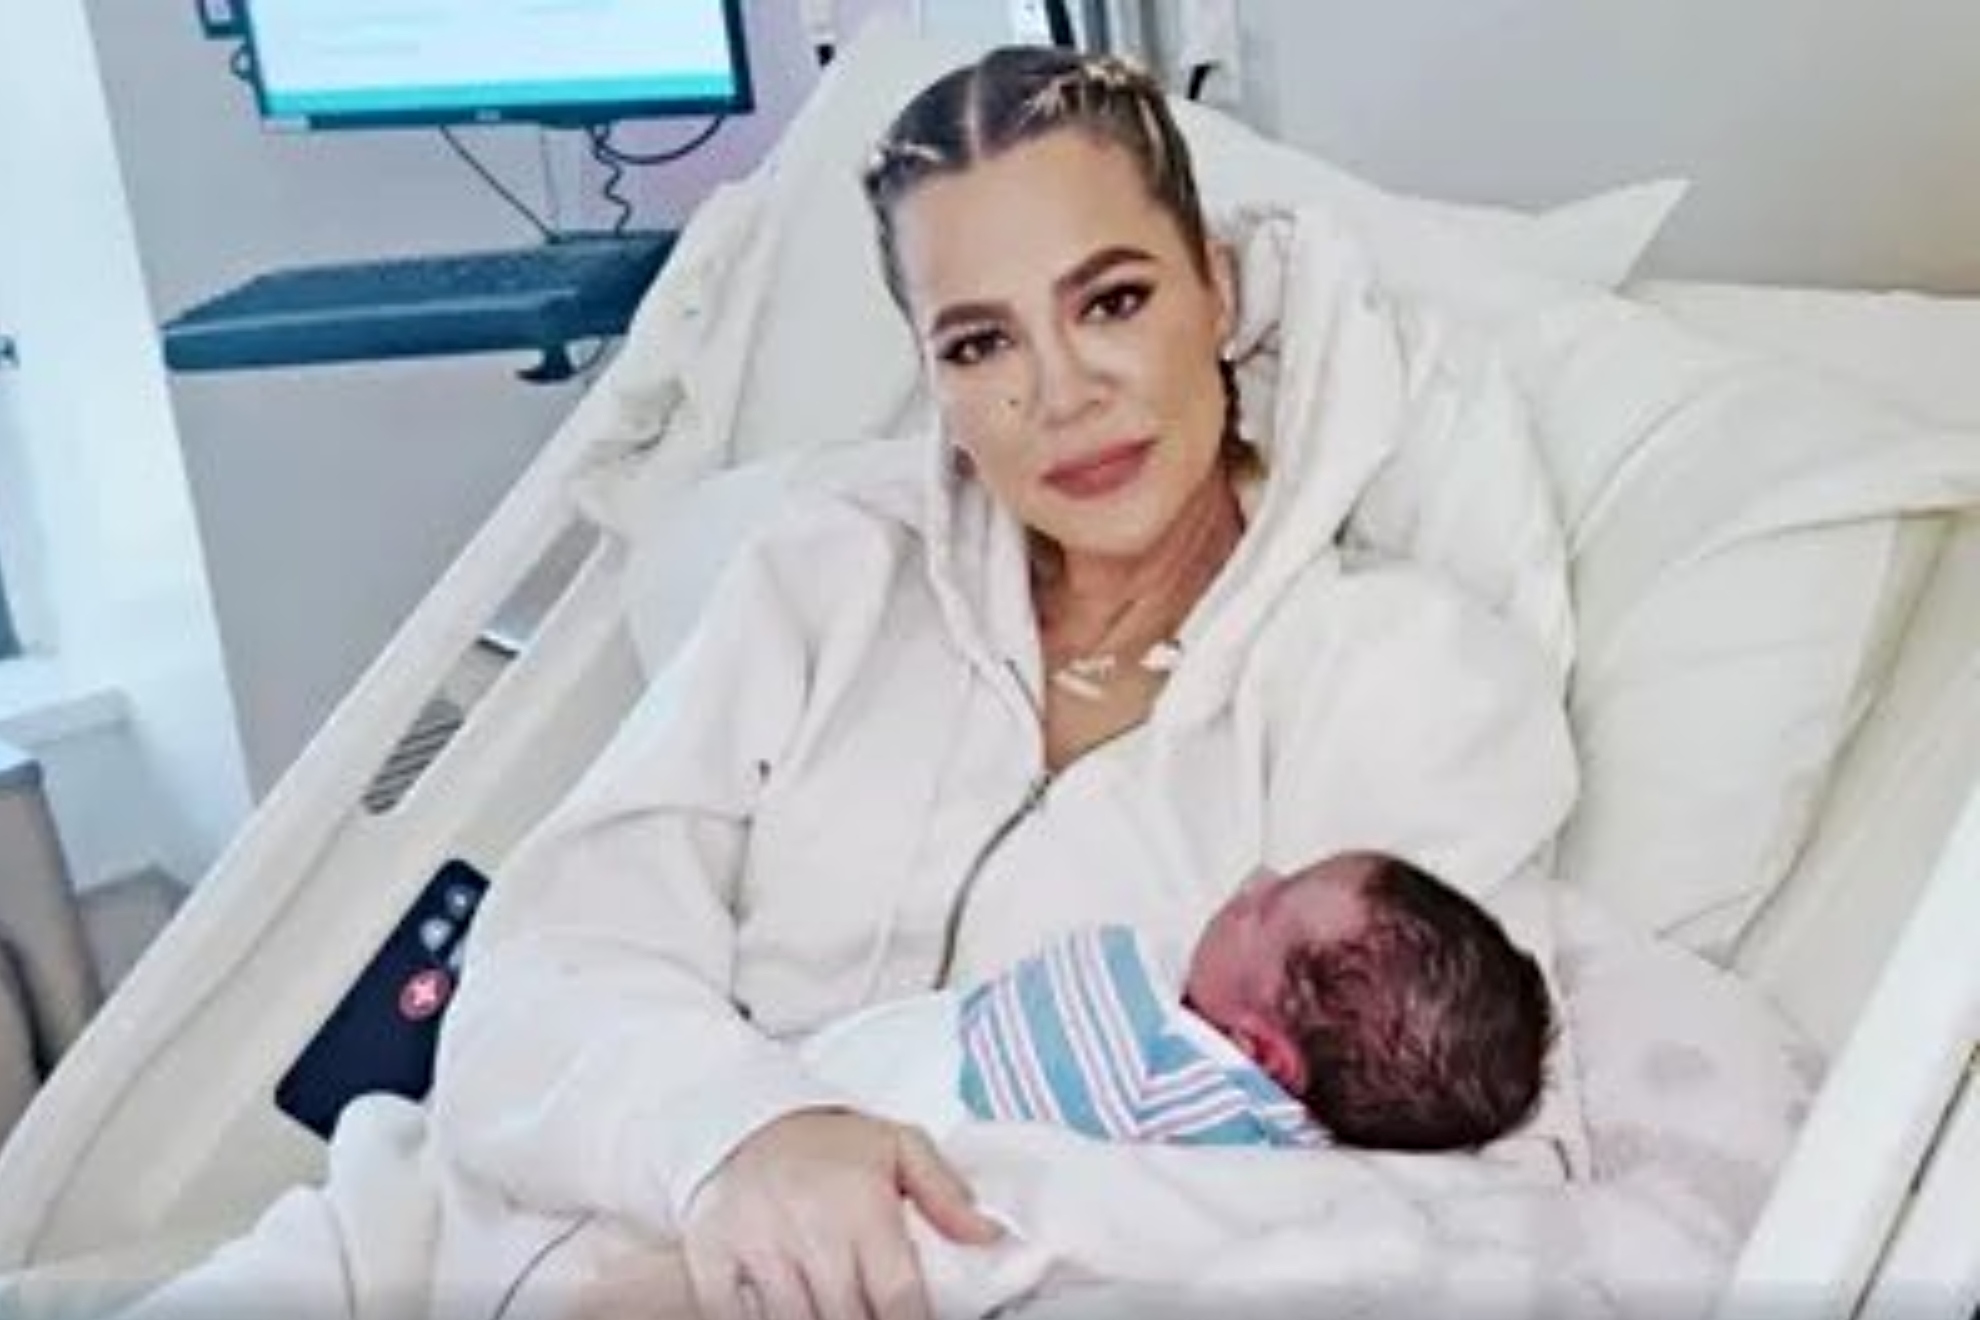 Khloe Kardashian's latest controversy: She poses with baby in hospital bed despite paying for a surrogate